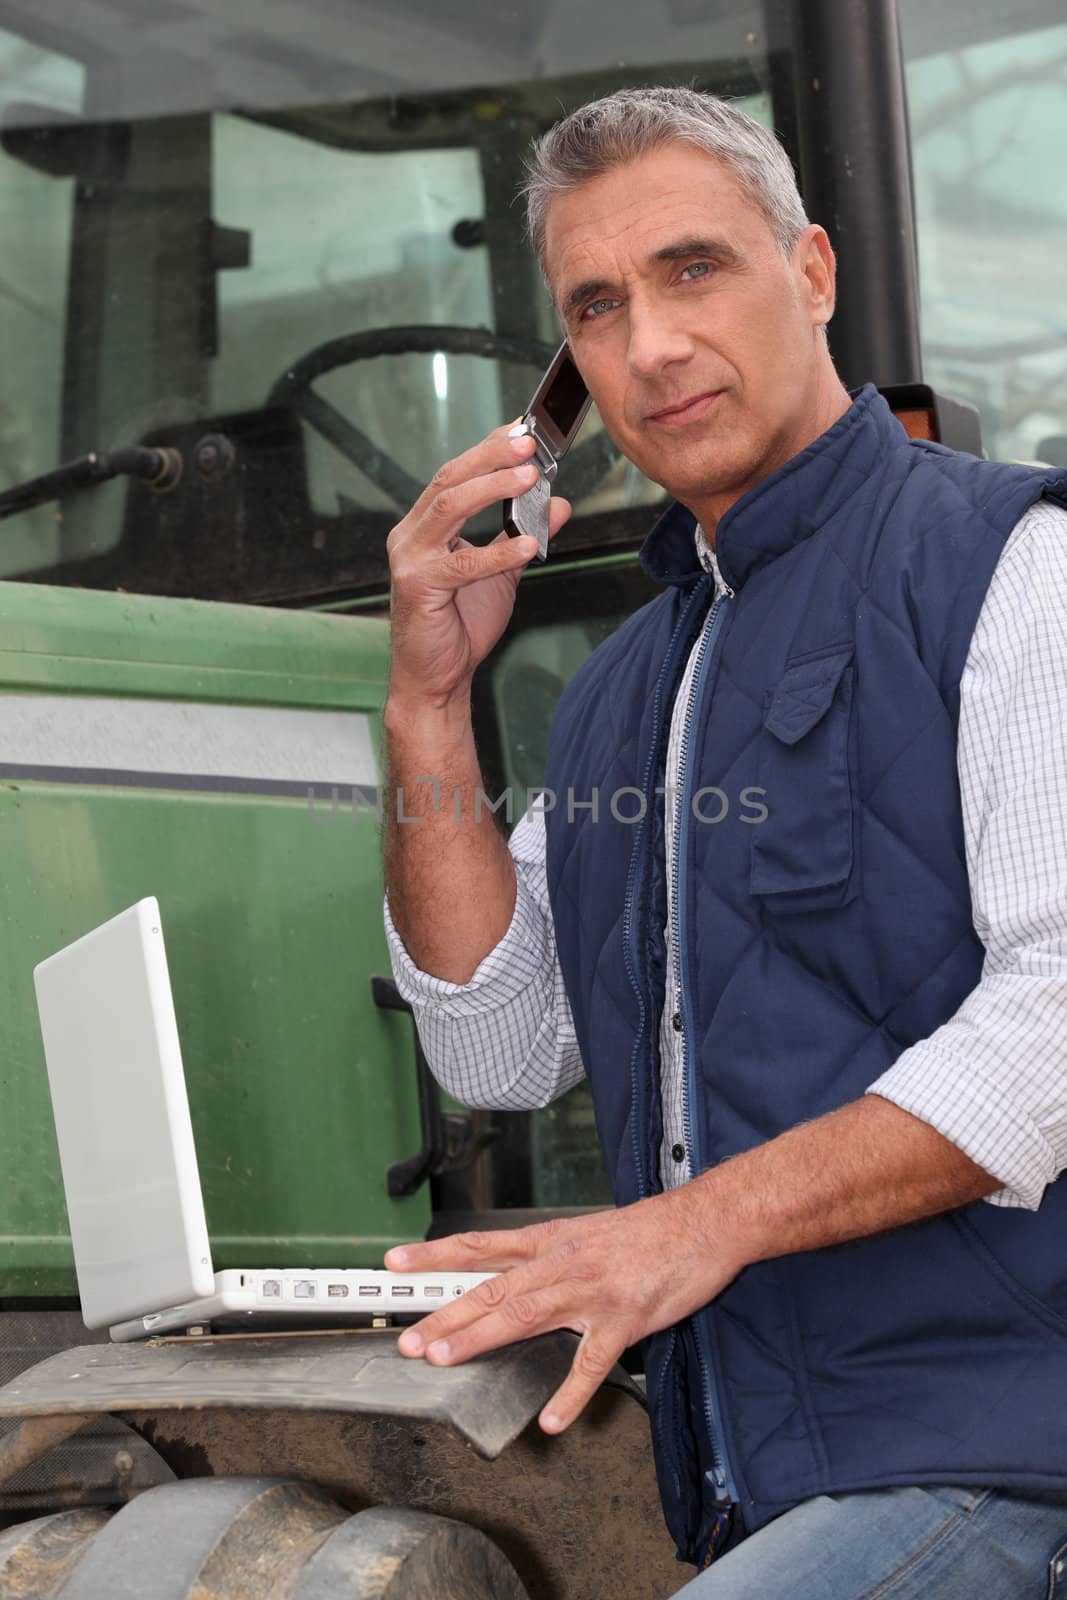 Farmer with a laptop and cellphone